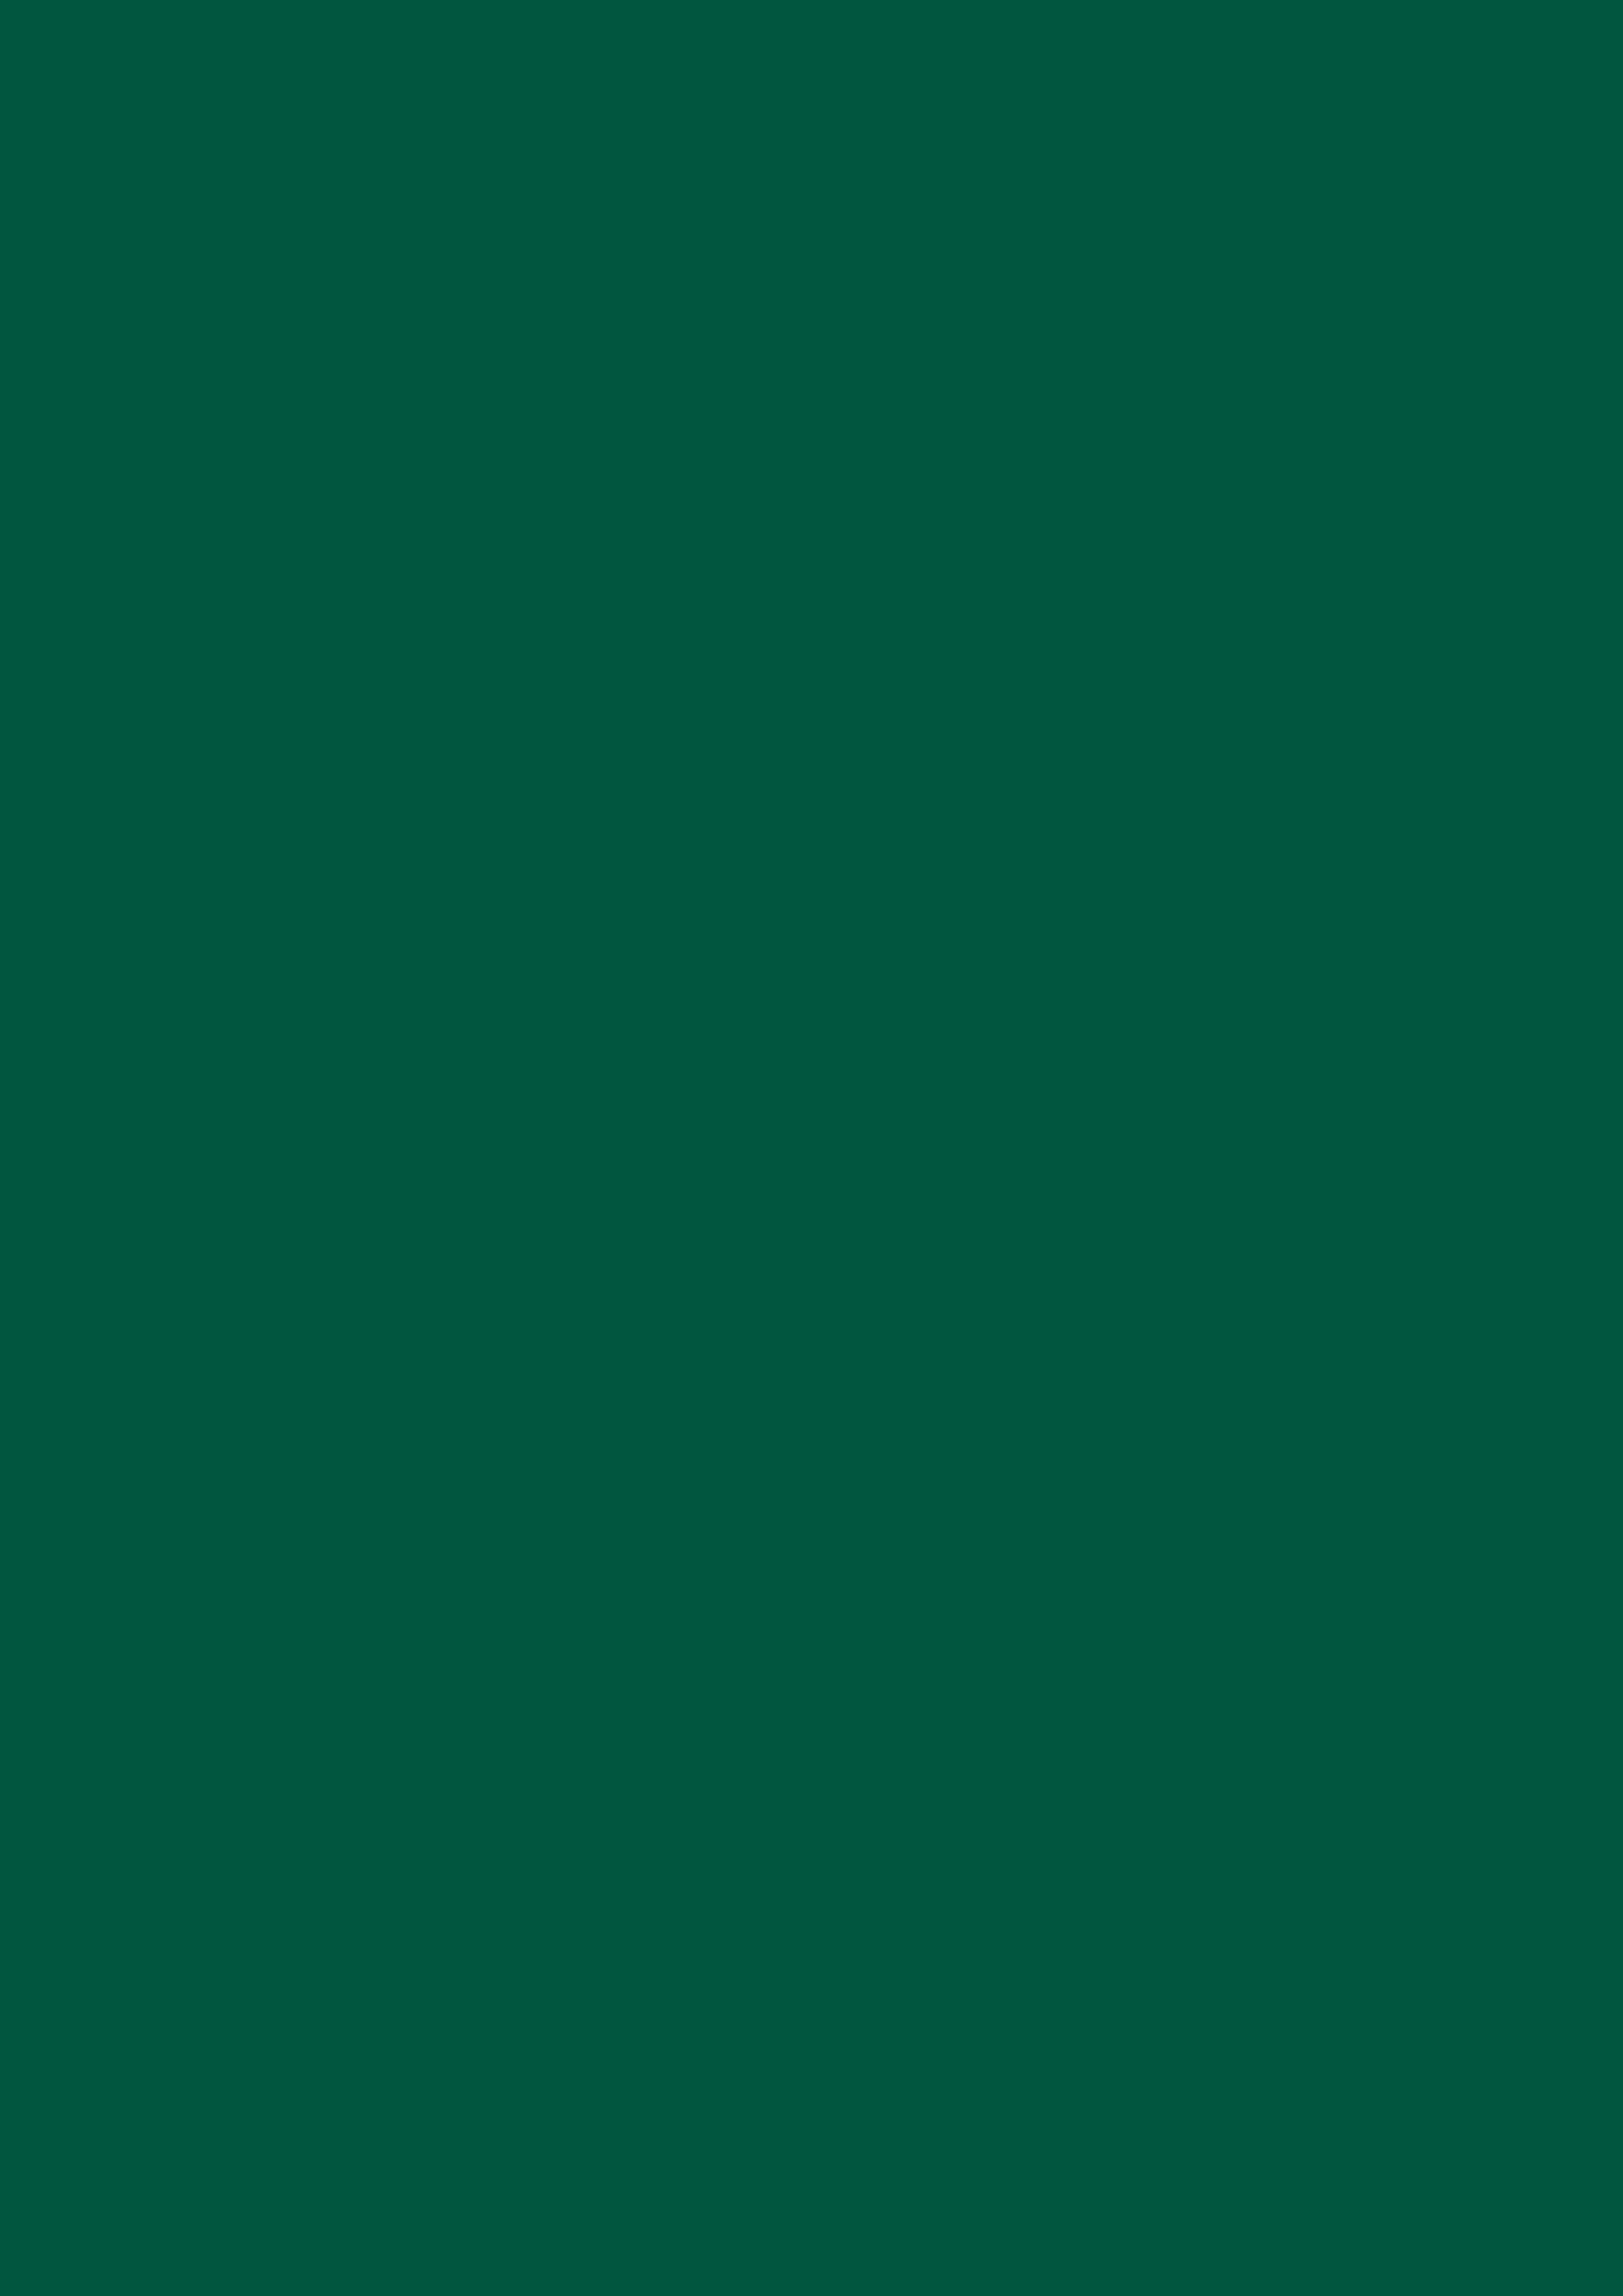 2480x3508 Sacramento State Green Solid Color Background